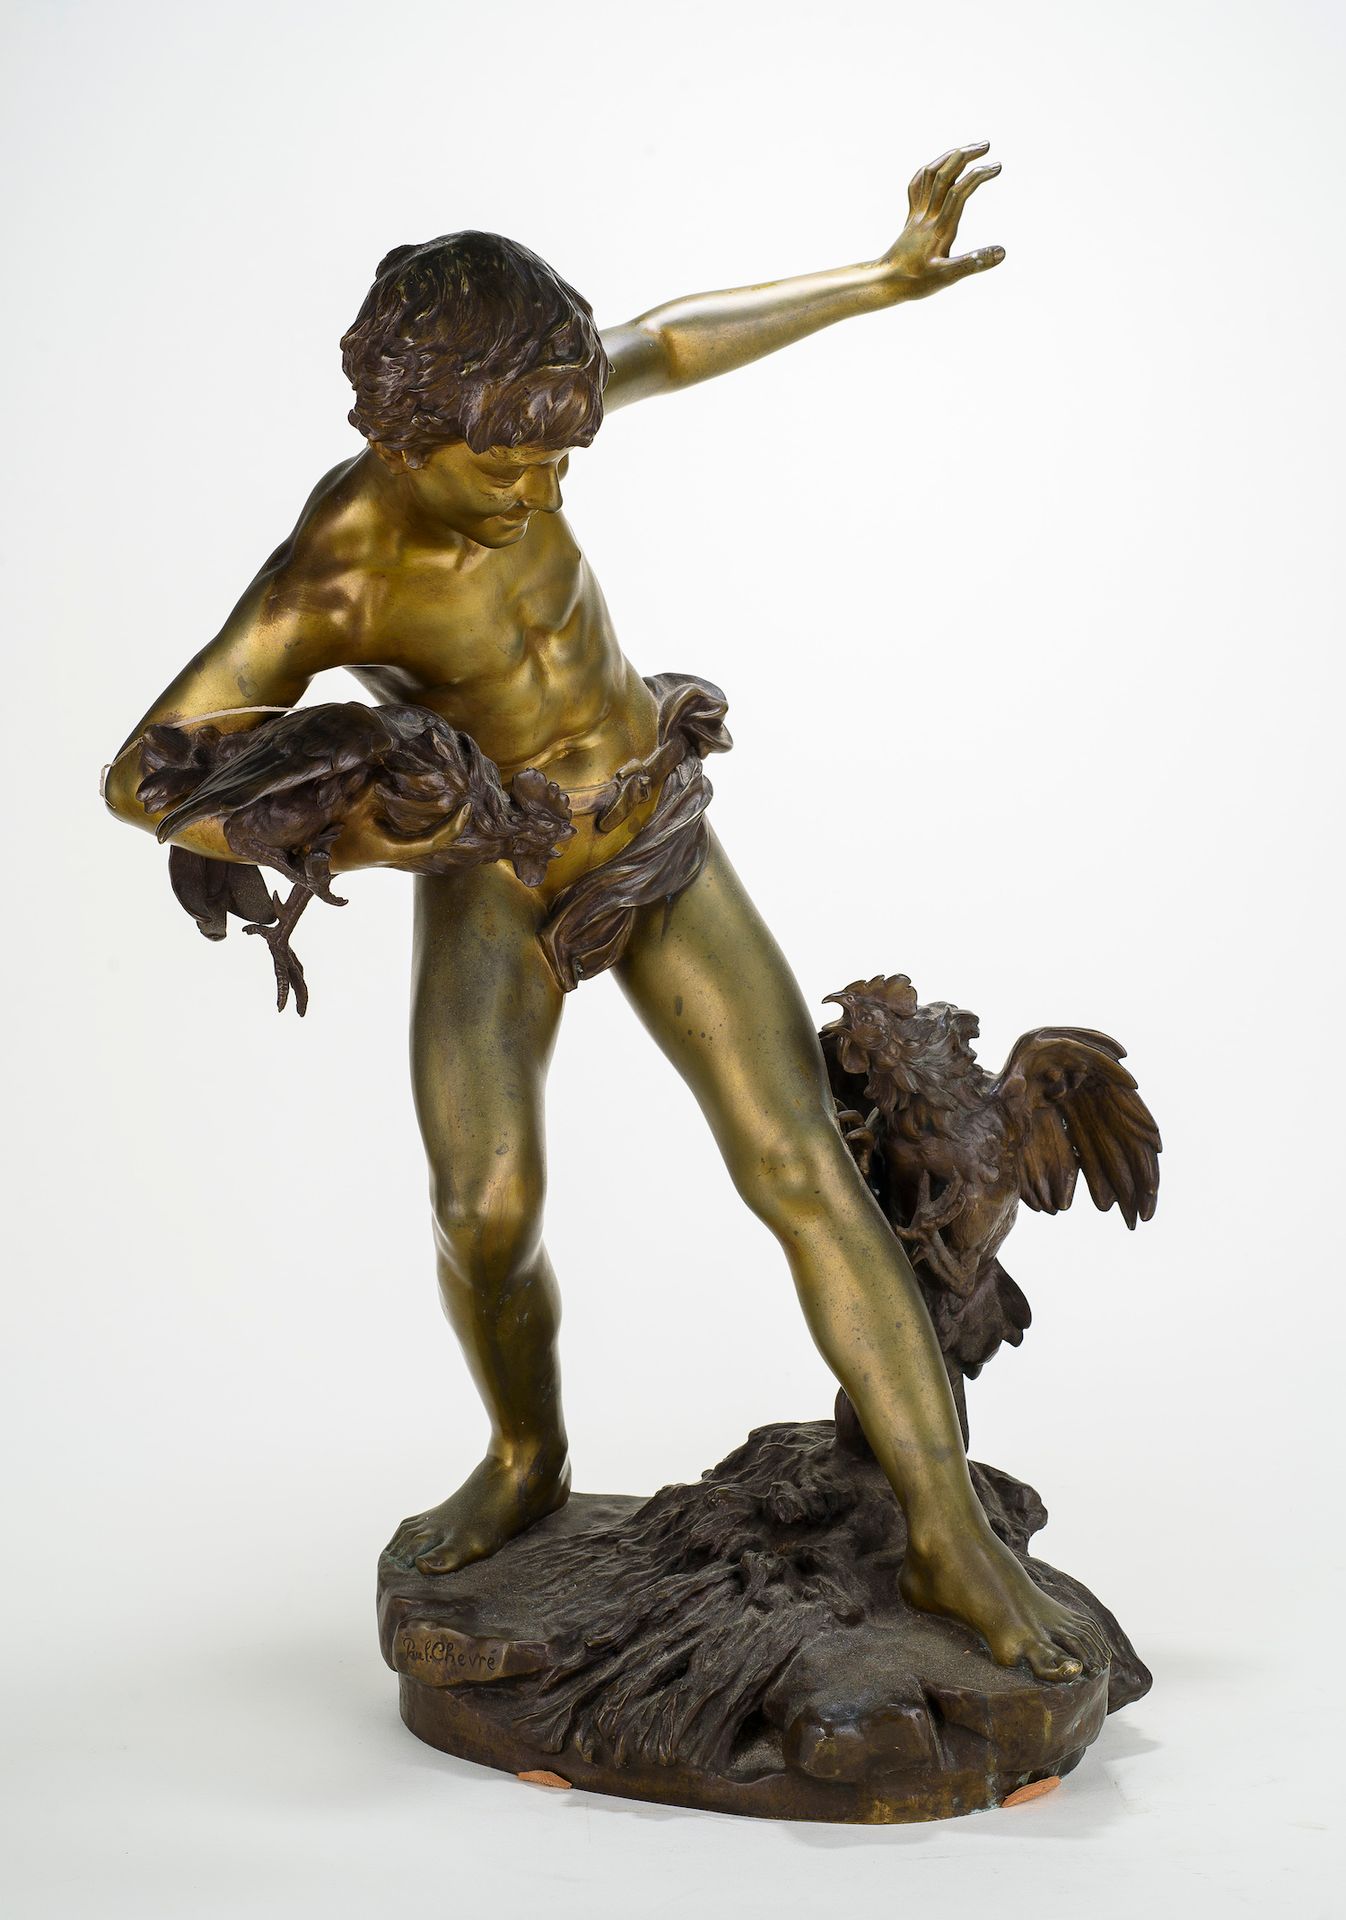 Null Paul Romain Chevré (1867-1914)

Young boy with roosters 

Bronze with gilde&hellip;